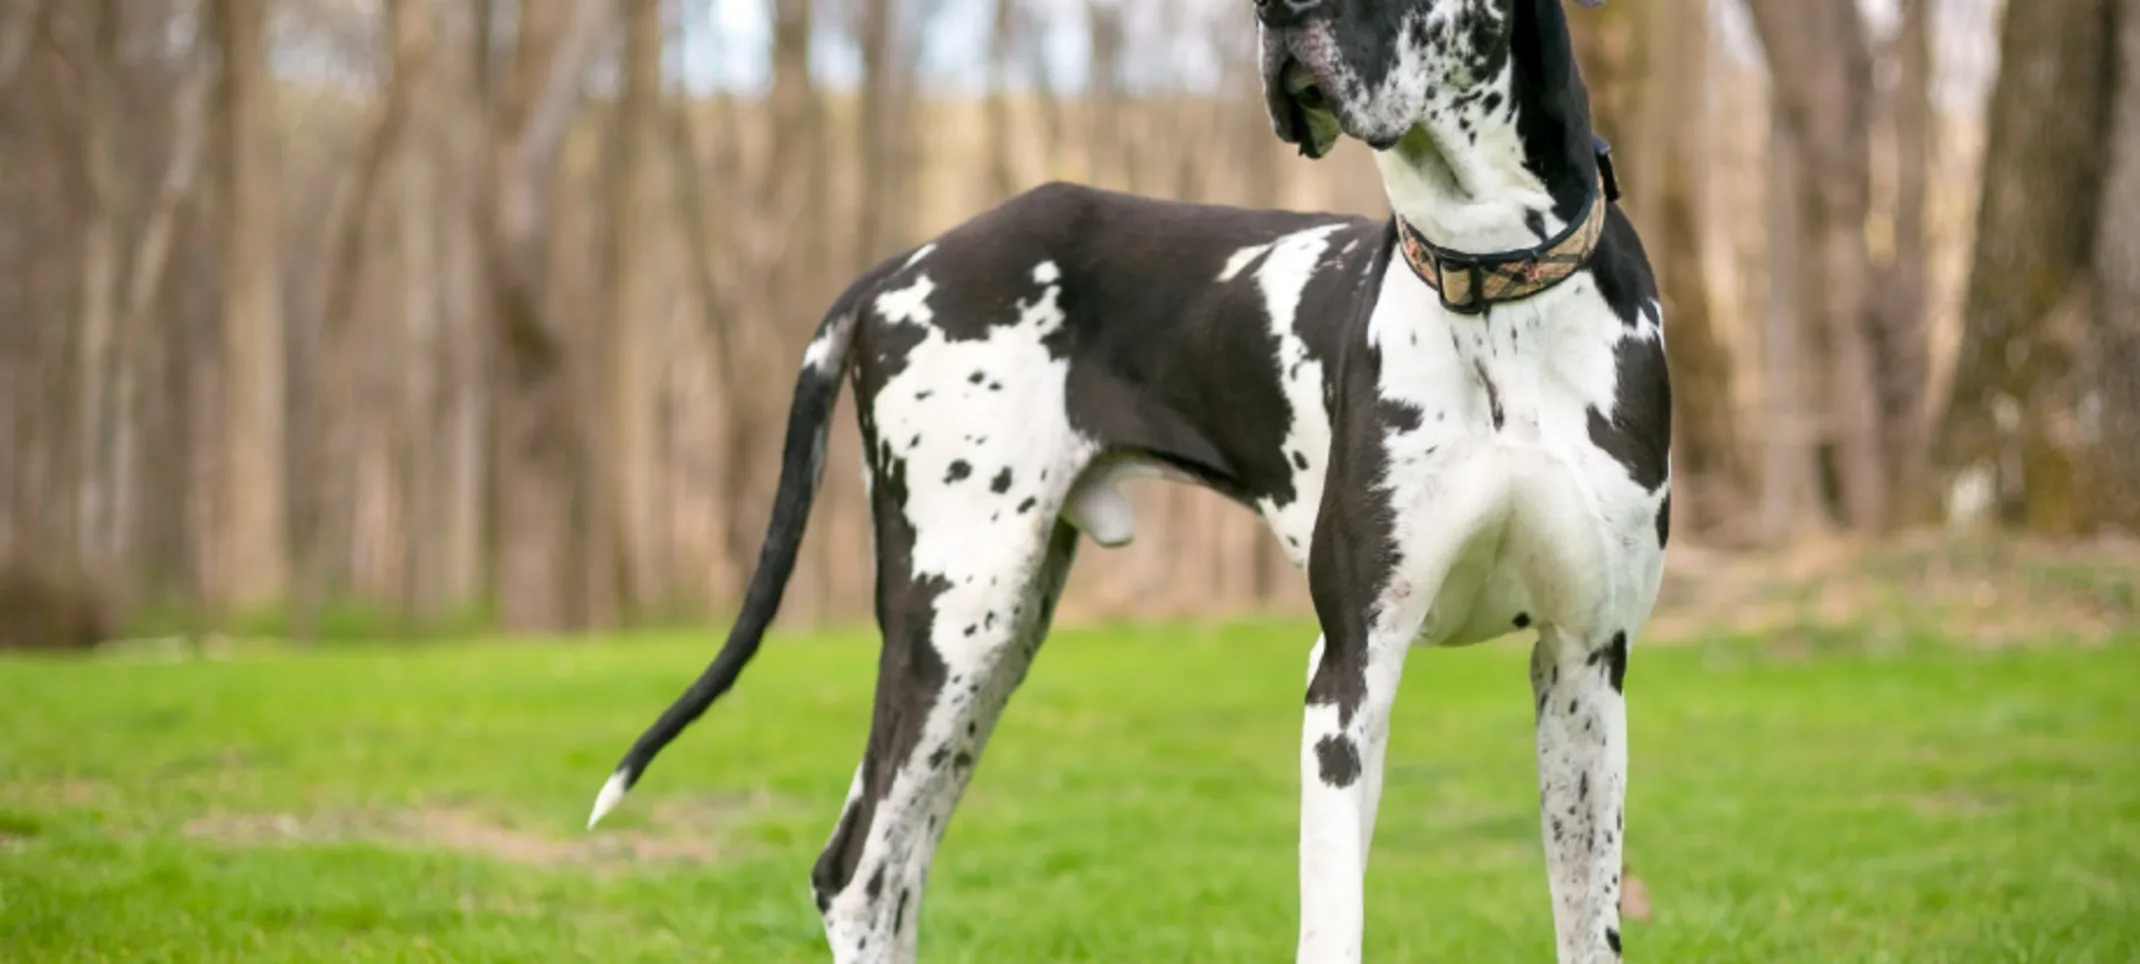 Large great dane standing on grass lawn with trees in the background